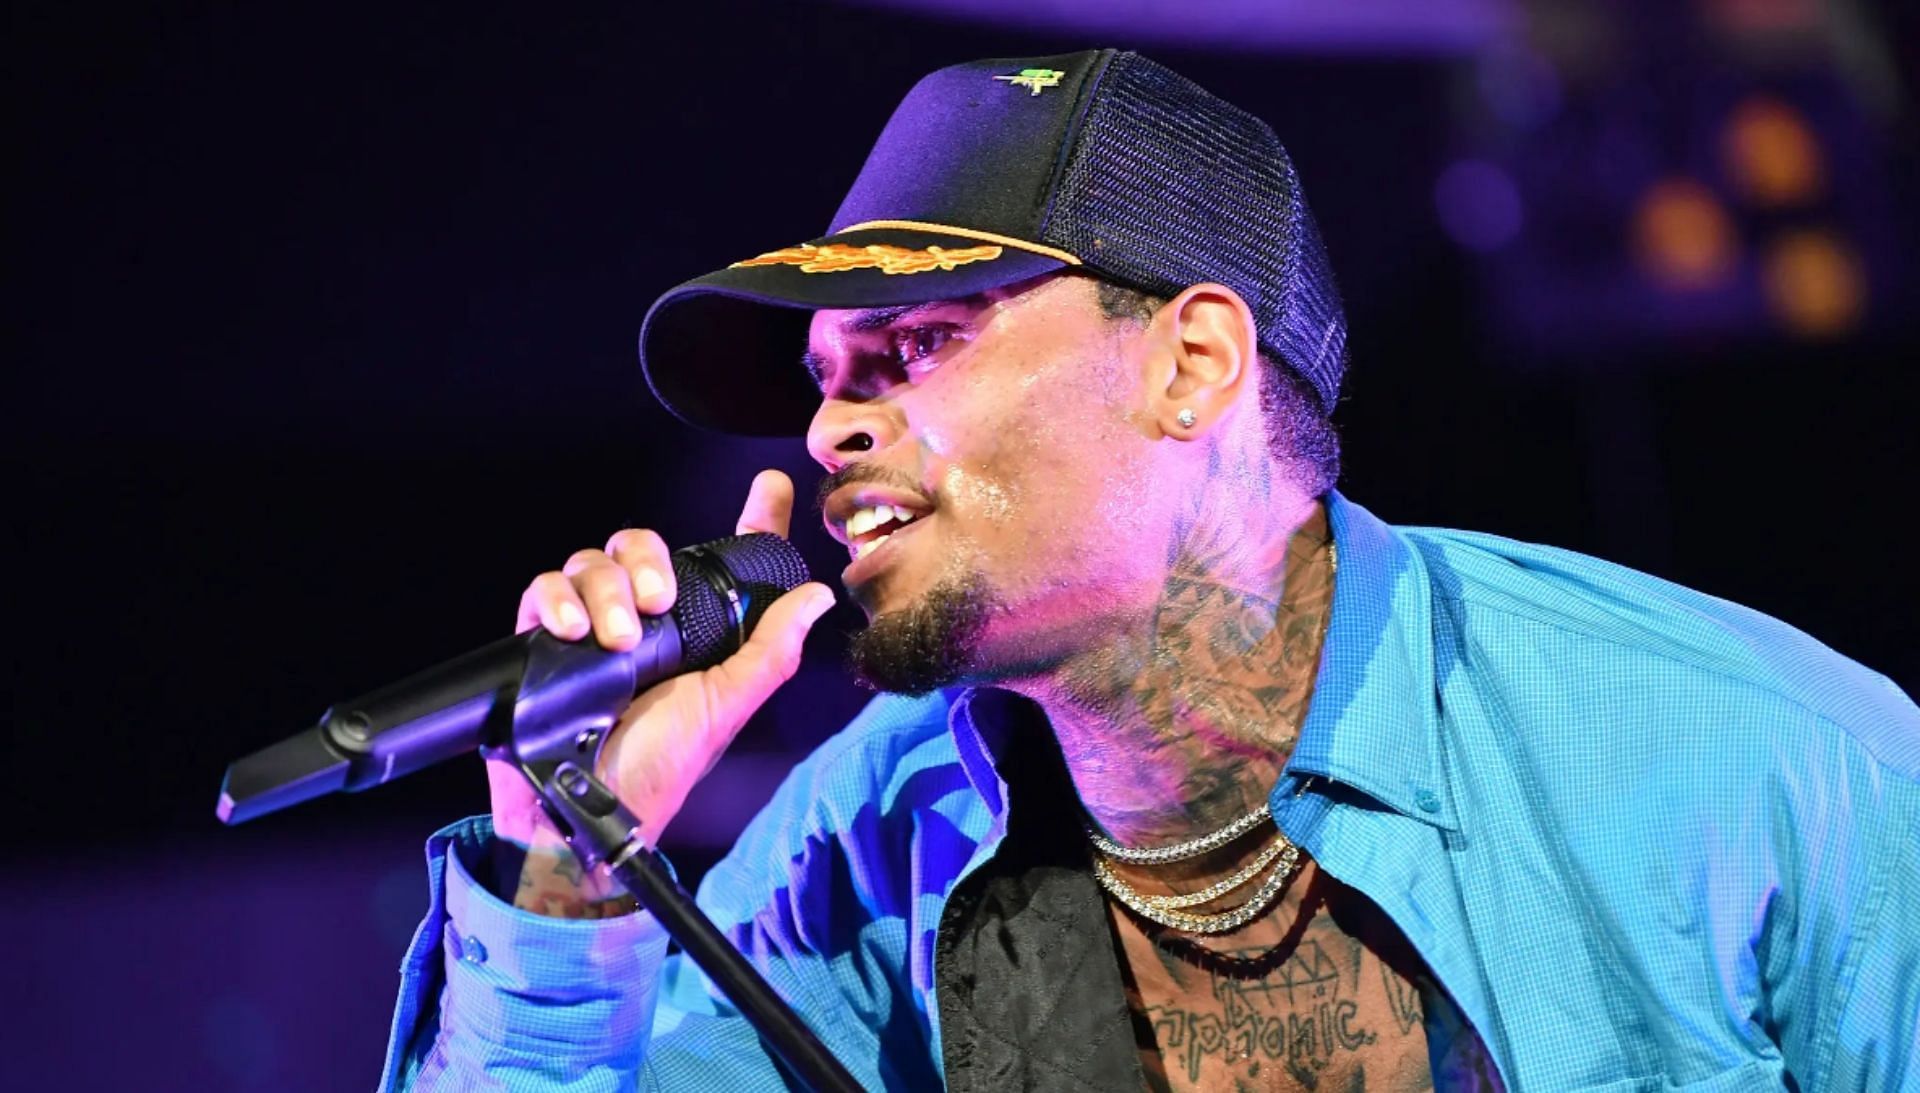 Chris Brown has been slapped with $4 million in income tax bills. (Image via Getty)